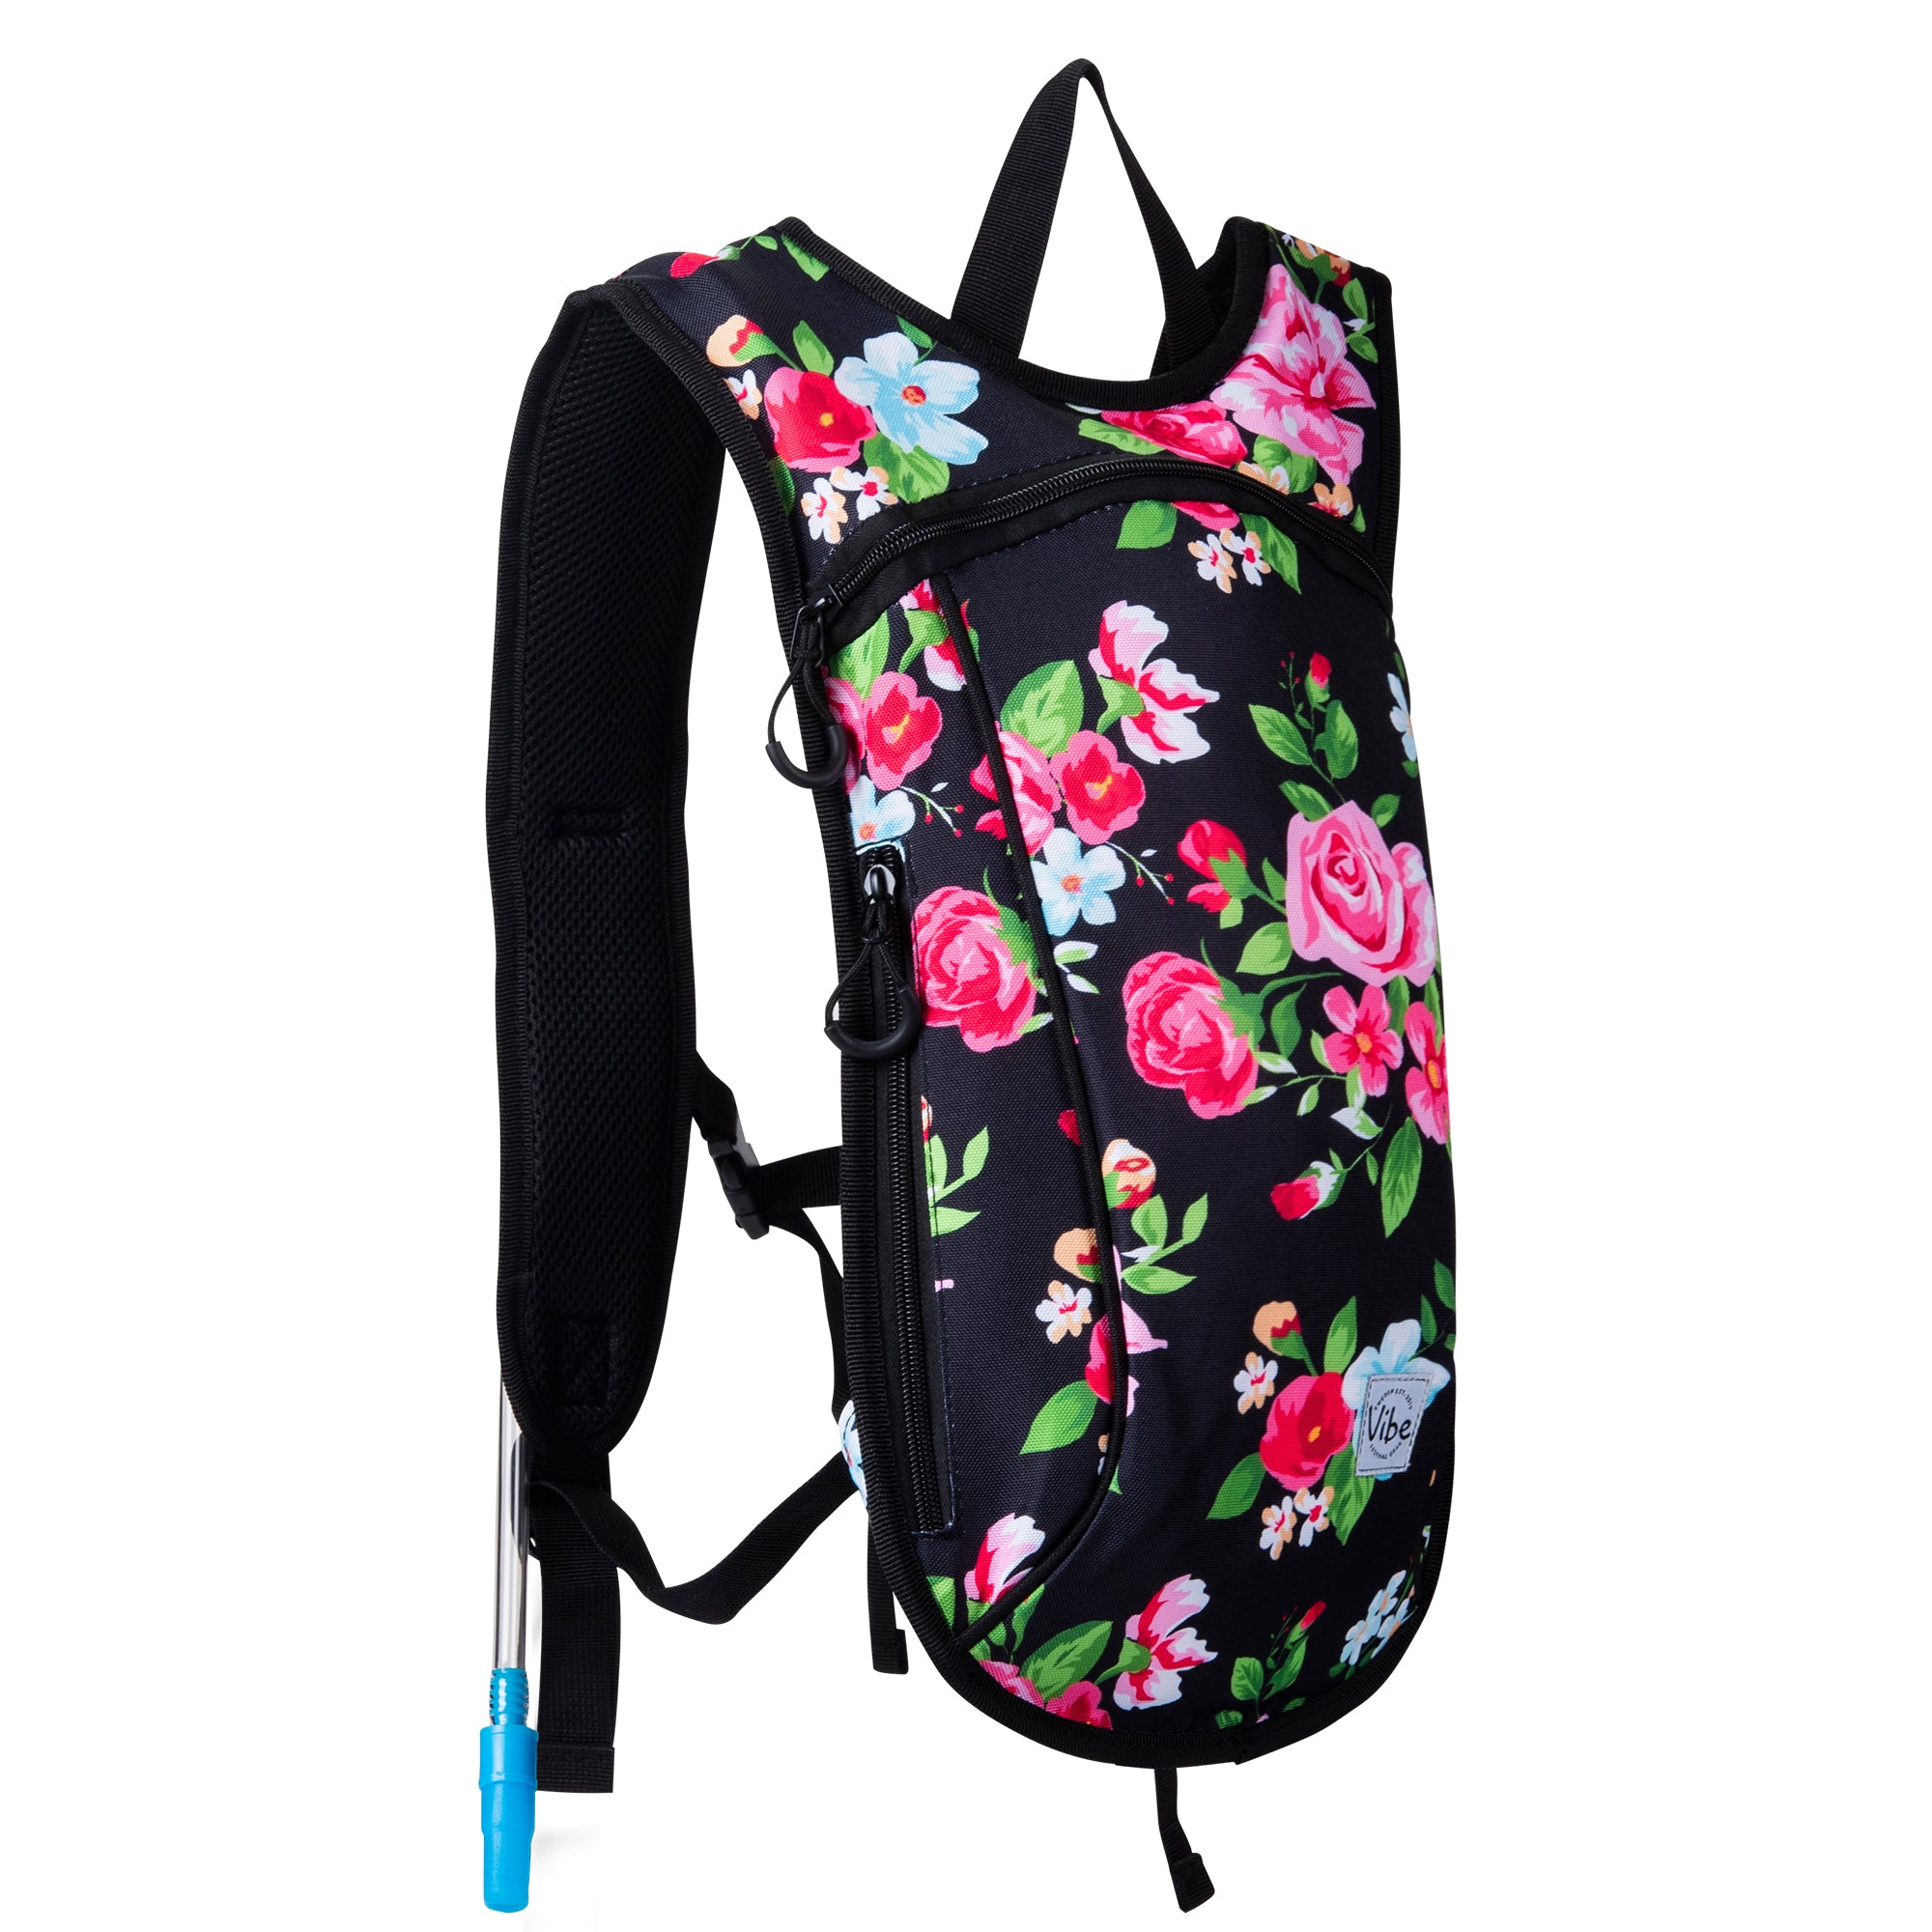 Hydration Backpack - Retro Floral